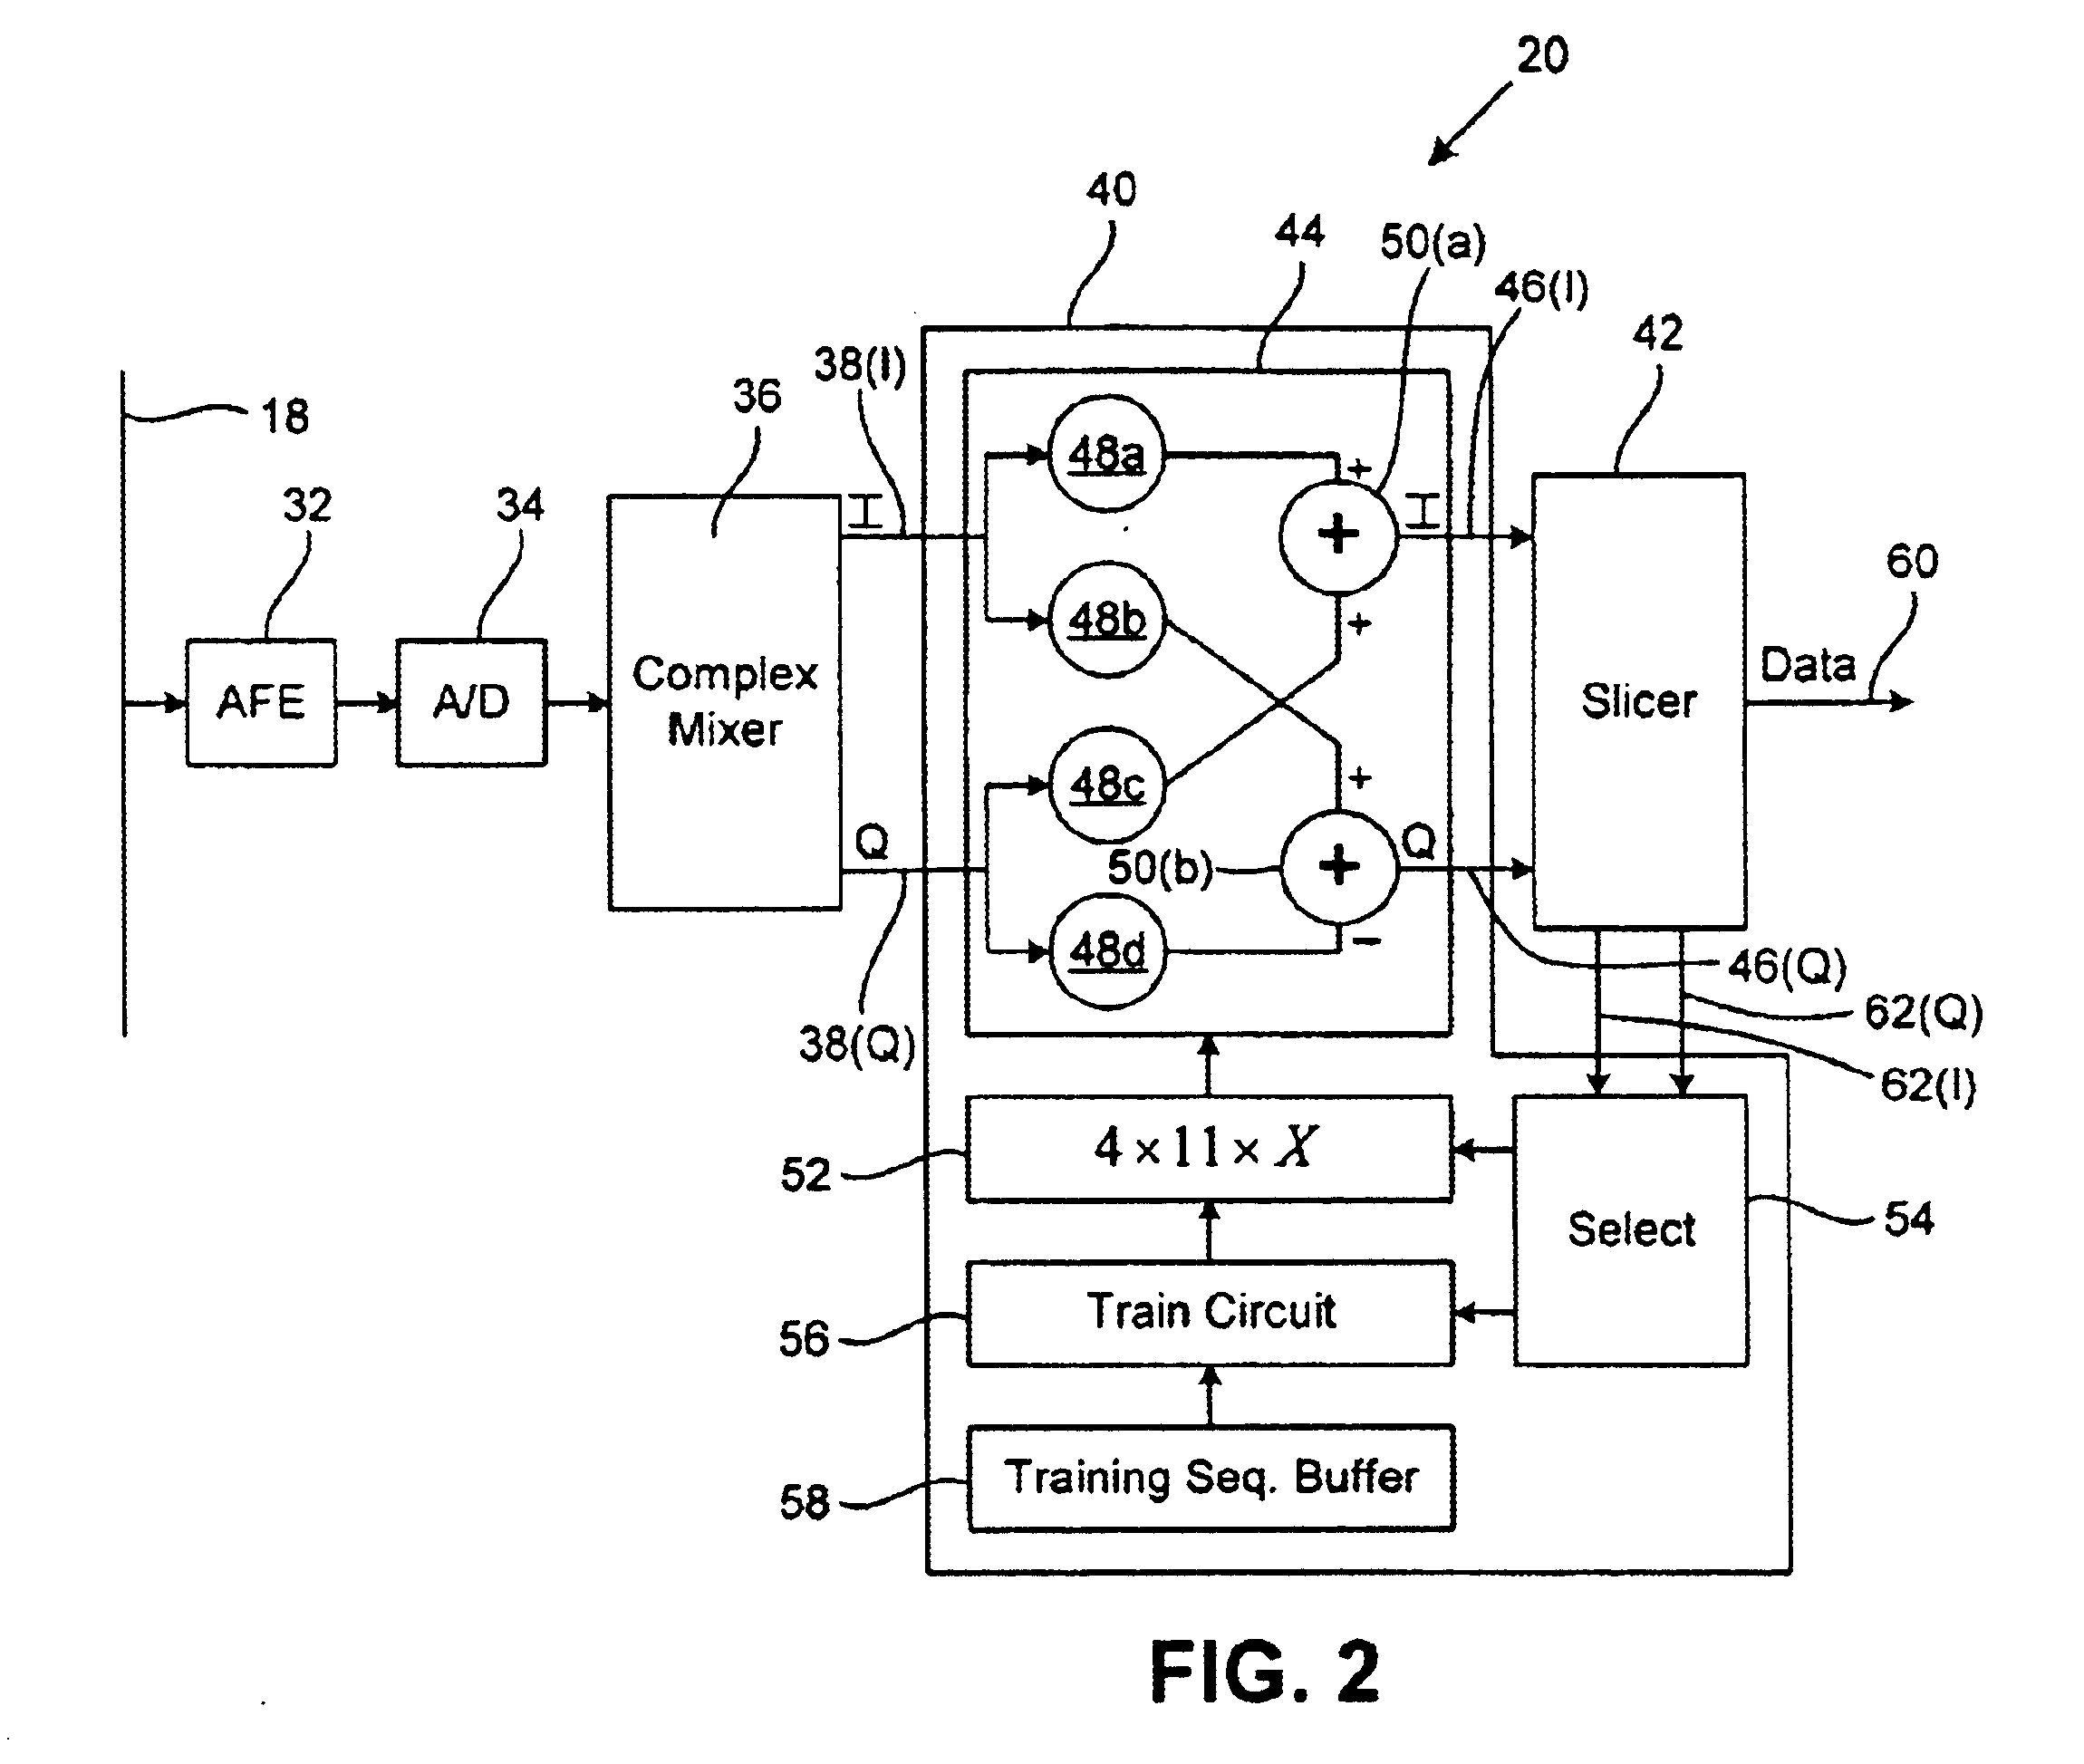 Network receiver utilizing pre-determined stored equalizer coefficients